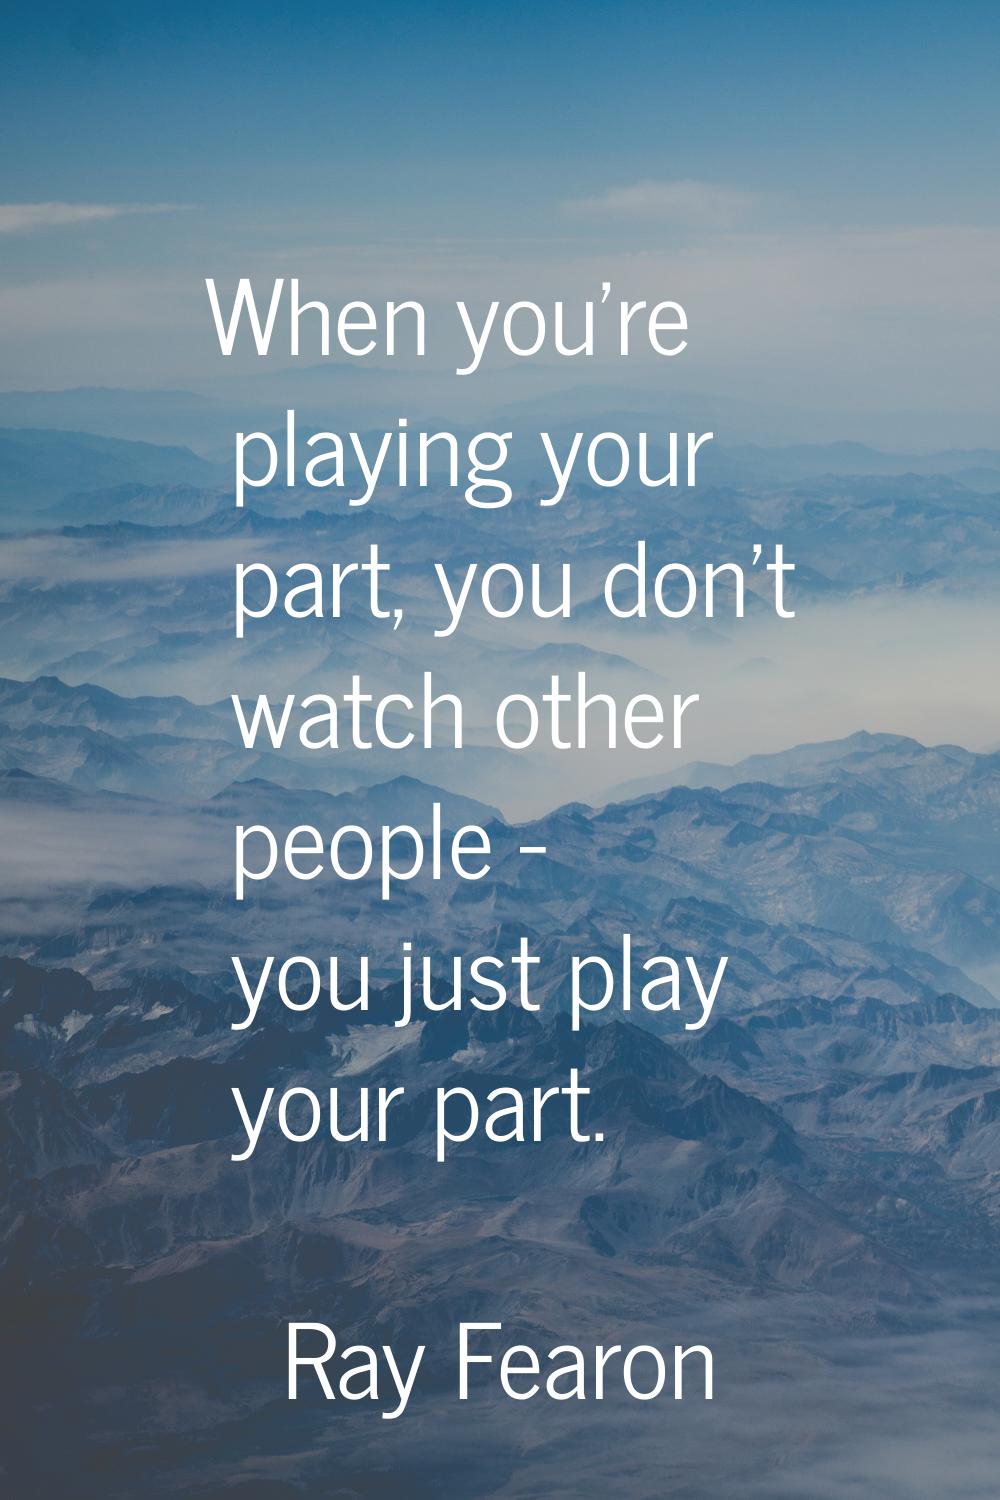 When you're playing your part, you don't watch other people - you just play your part.